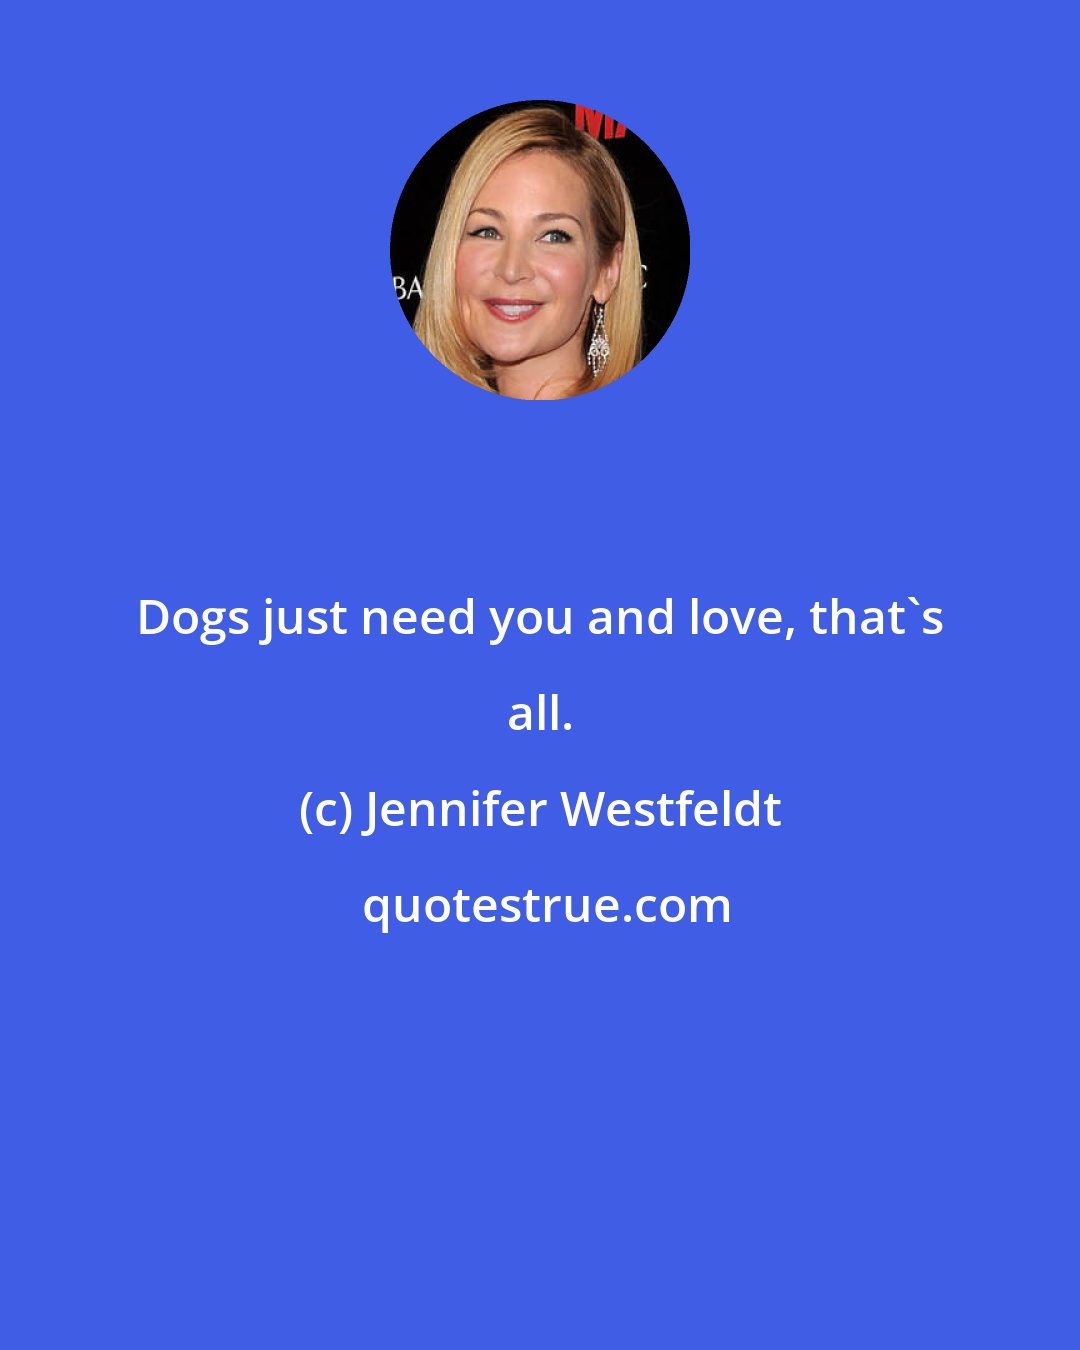 Jennifer Westfeldt: Dogs just need you and love, that's all.